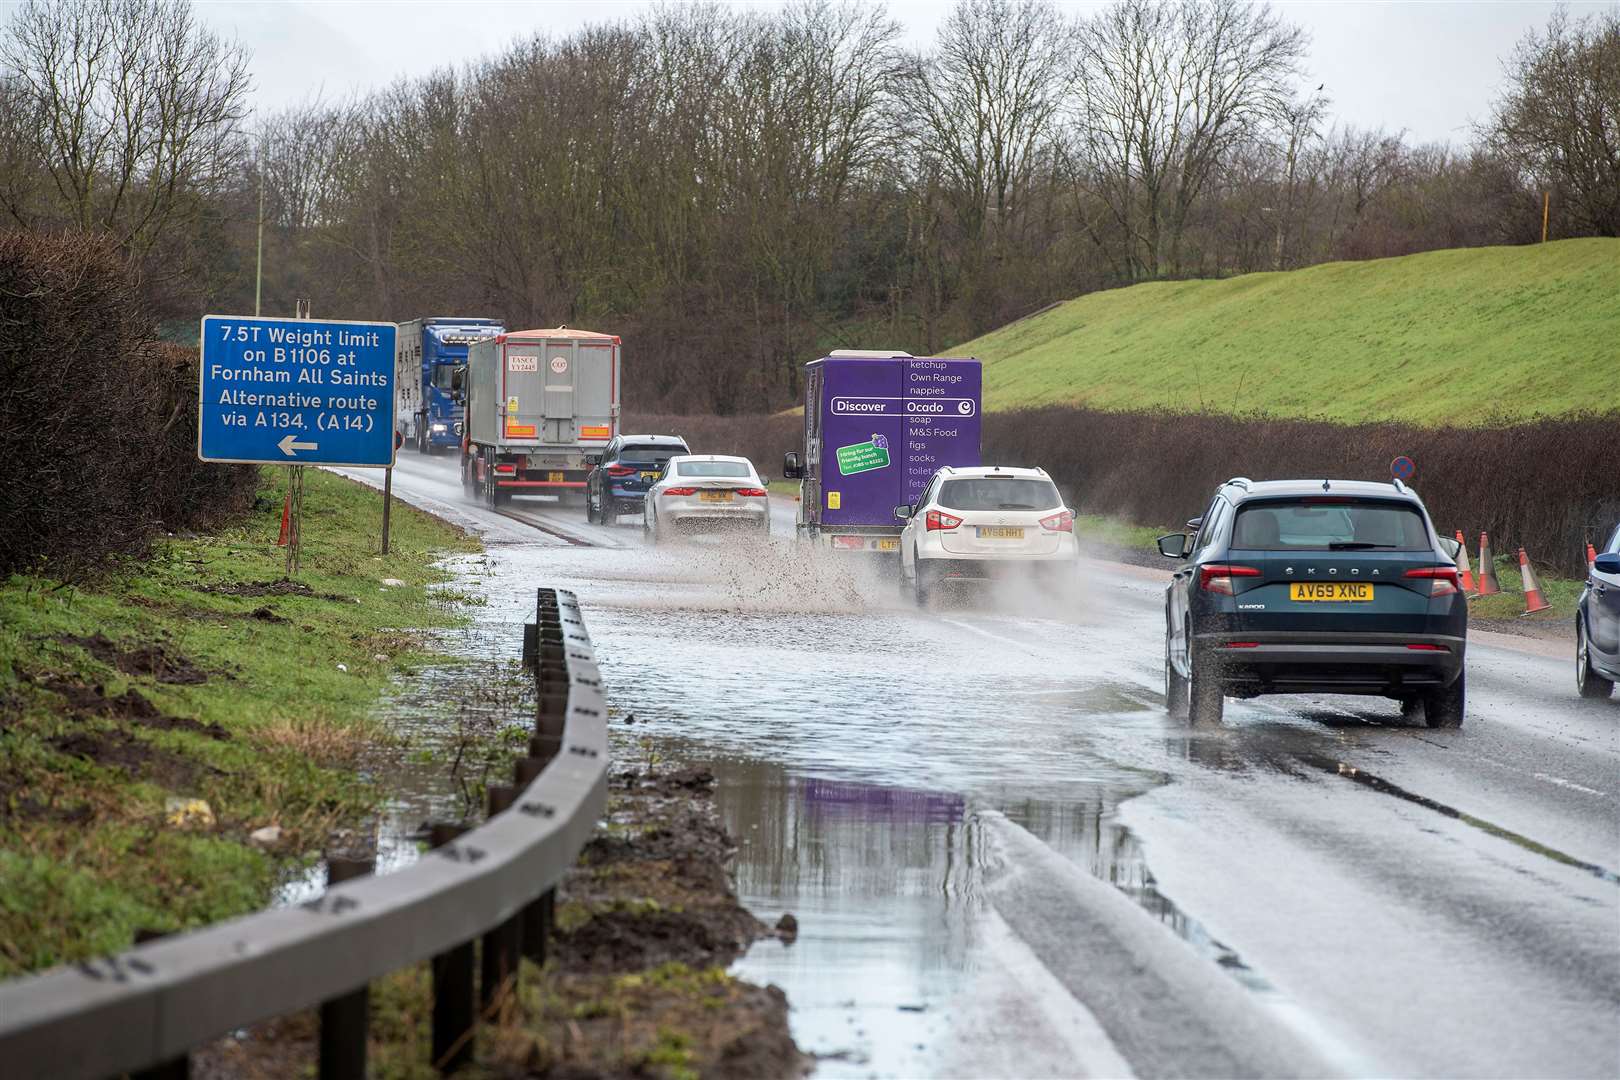 Compiegne Way in Bury St Edmunds is flooded again. Picture: Mark Westley